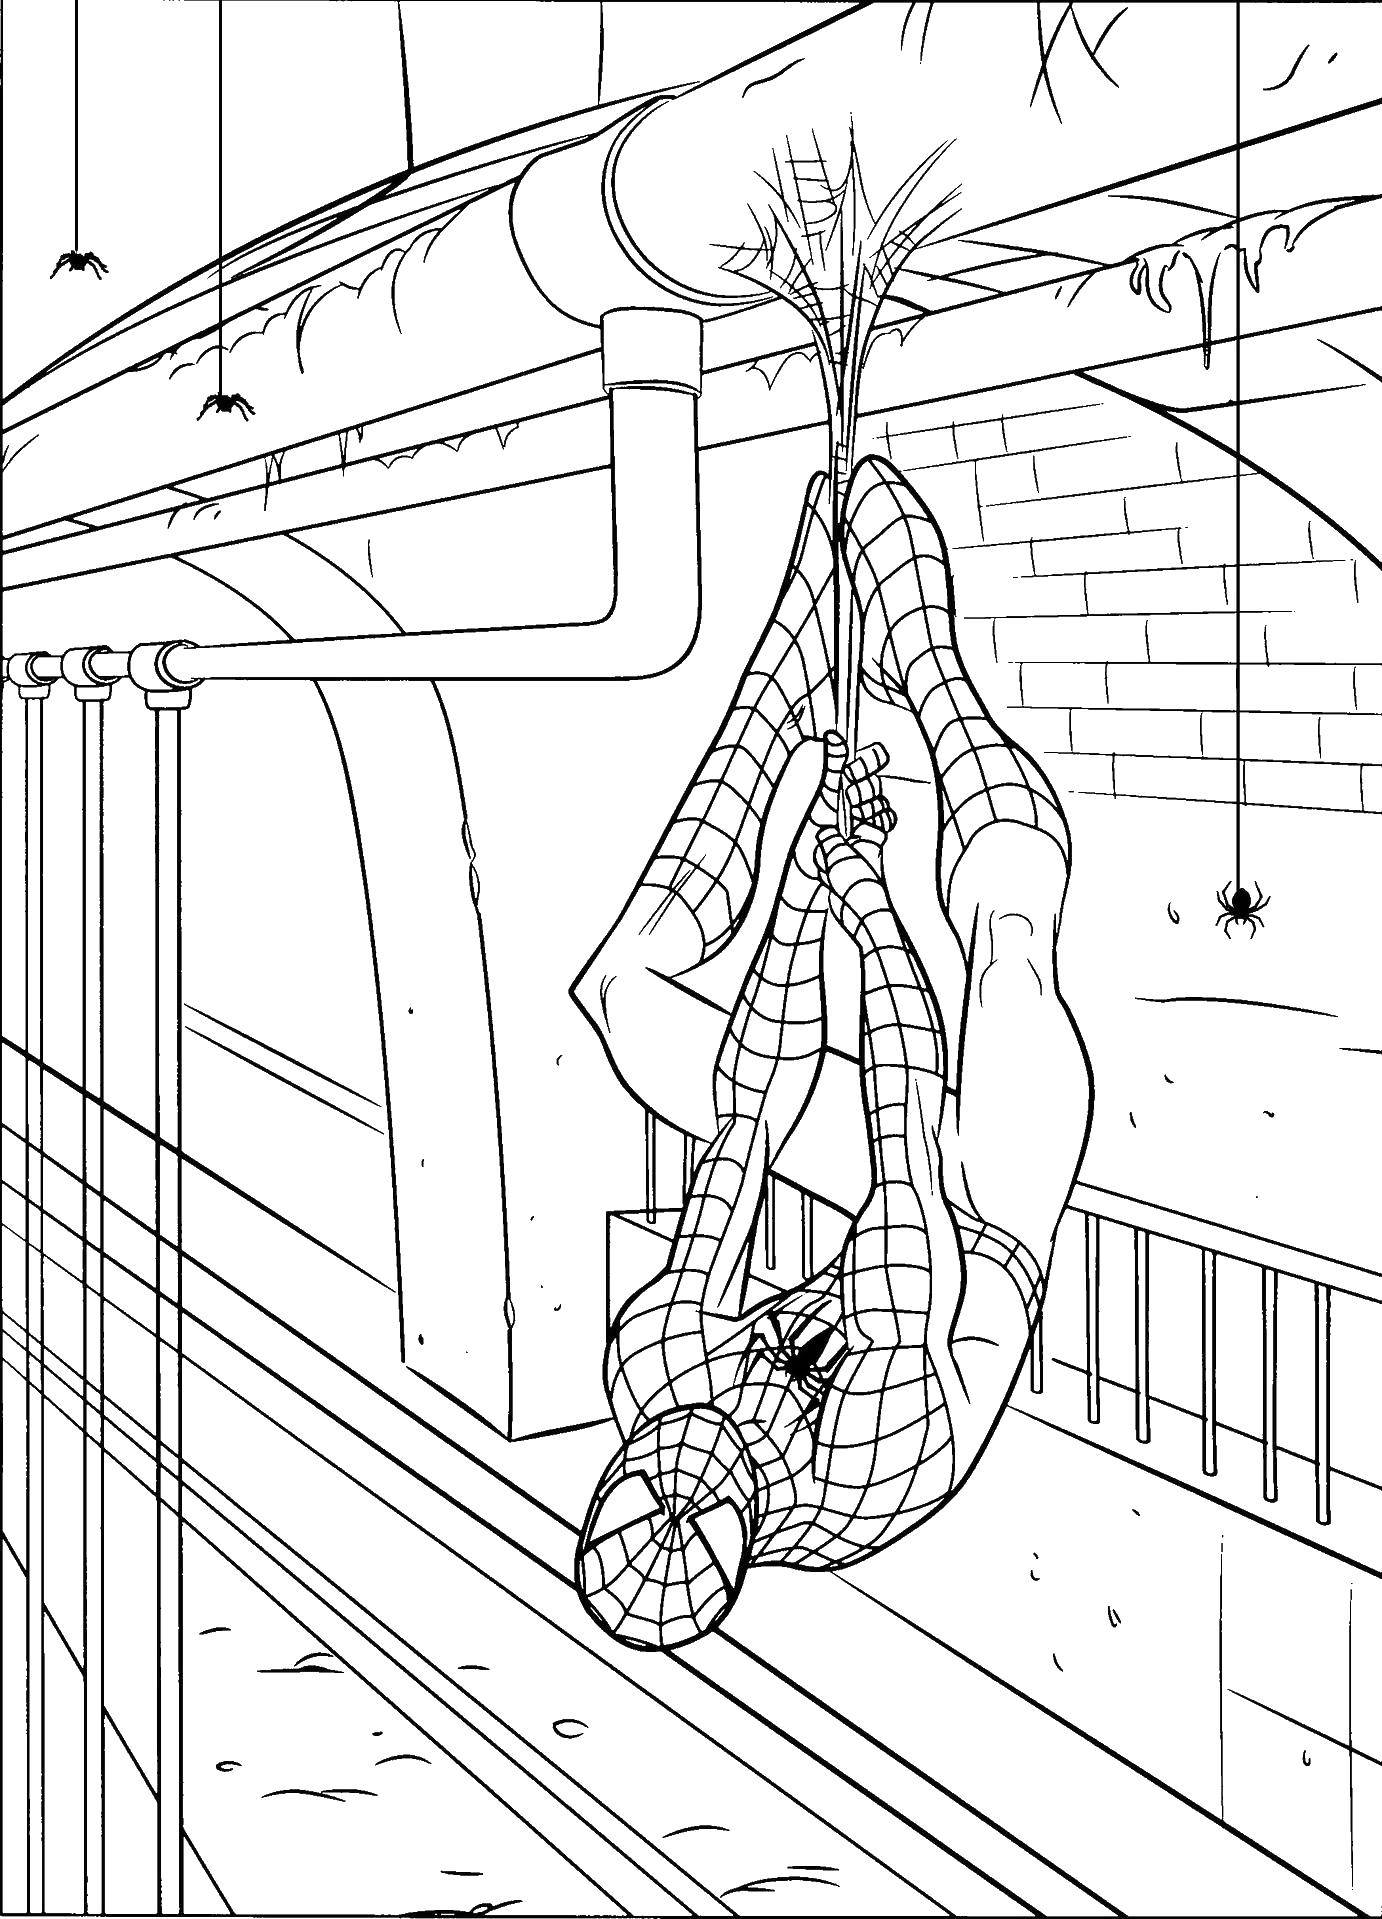 Coloring Spider-man saves people. Category spider man. Tags:  spider man, superheroes.